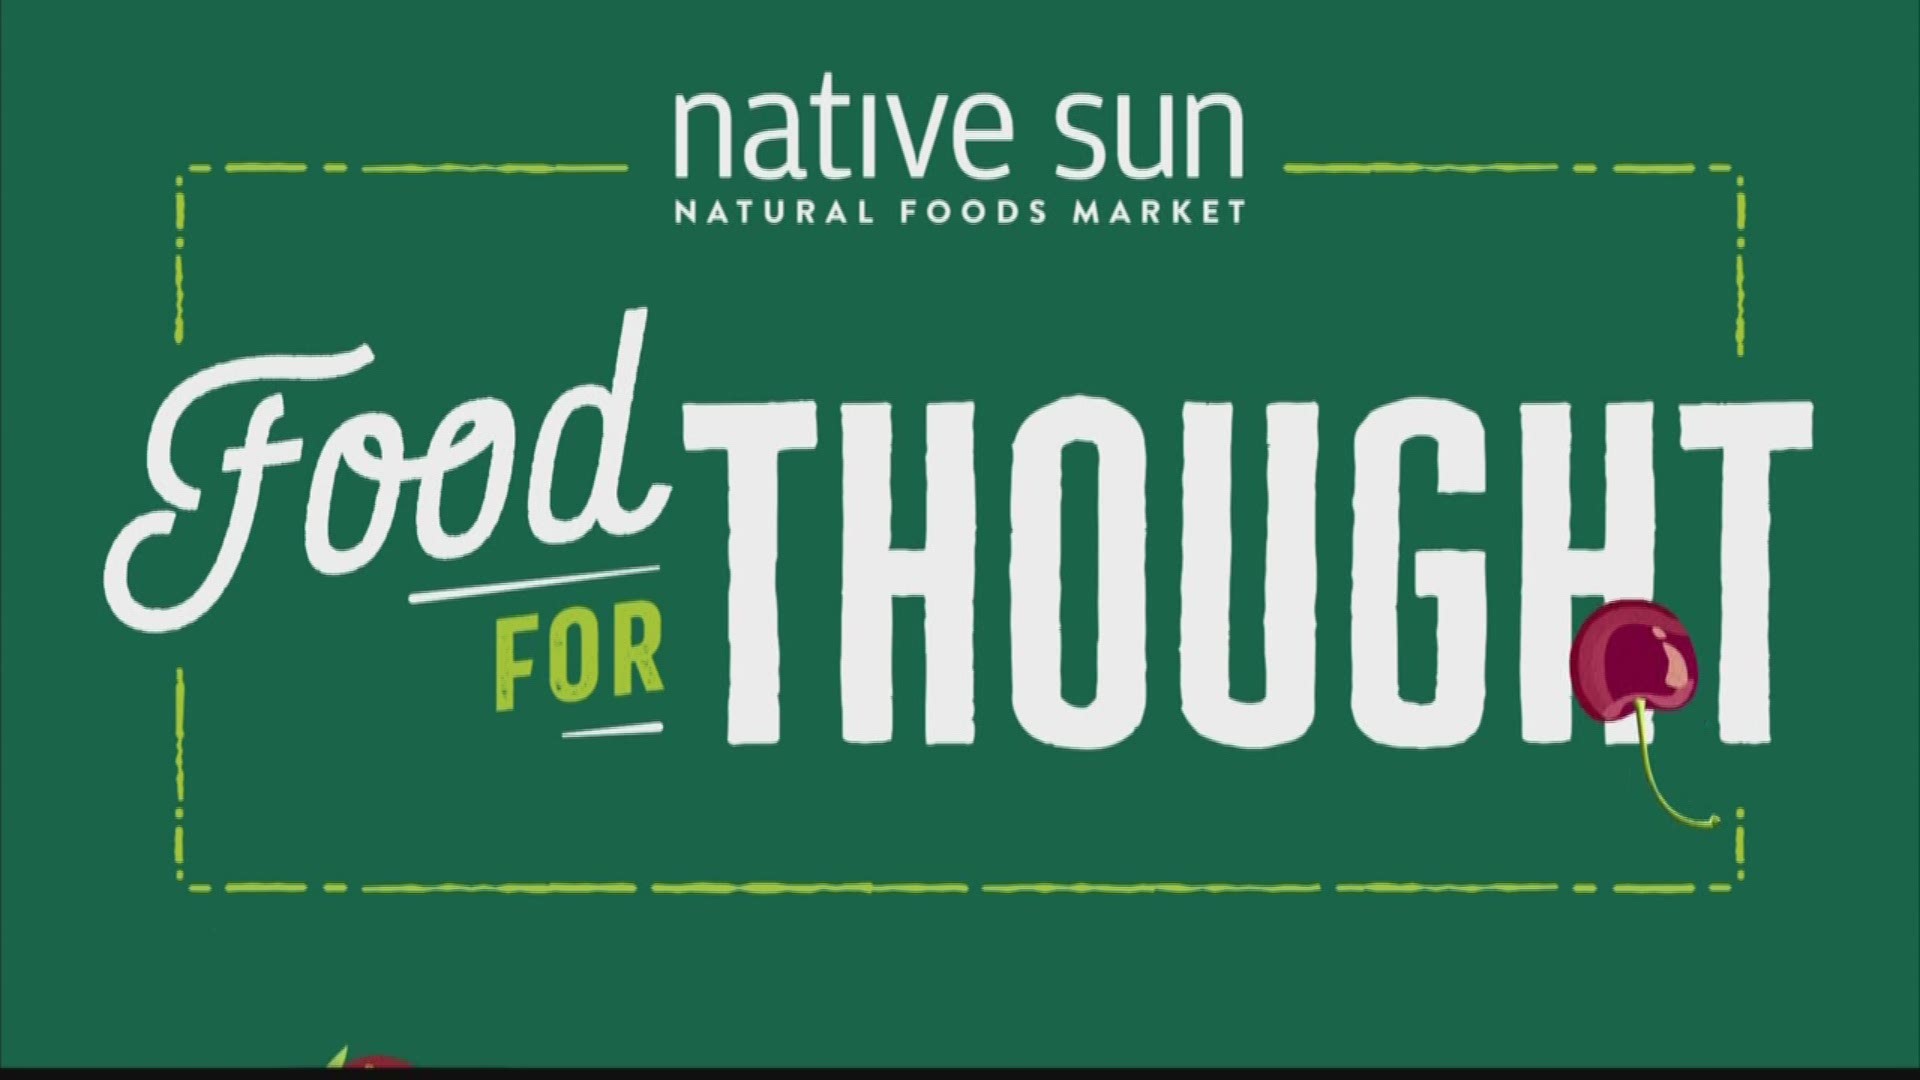 Native Sun's Food for Thought